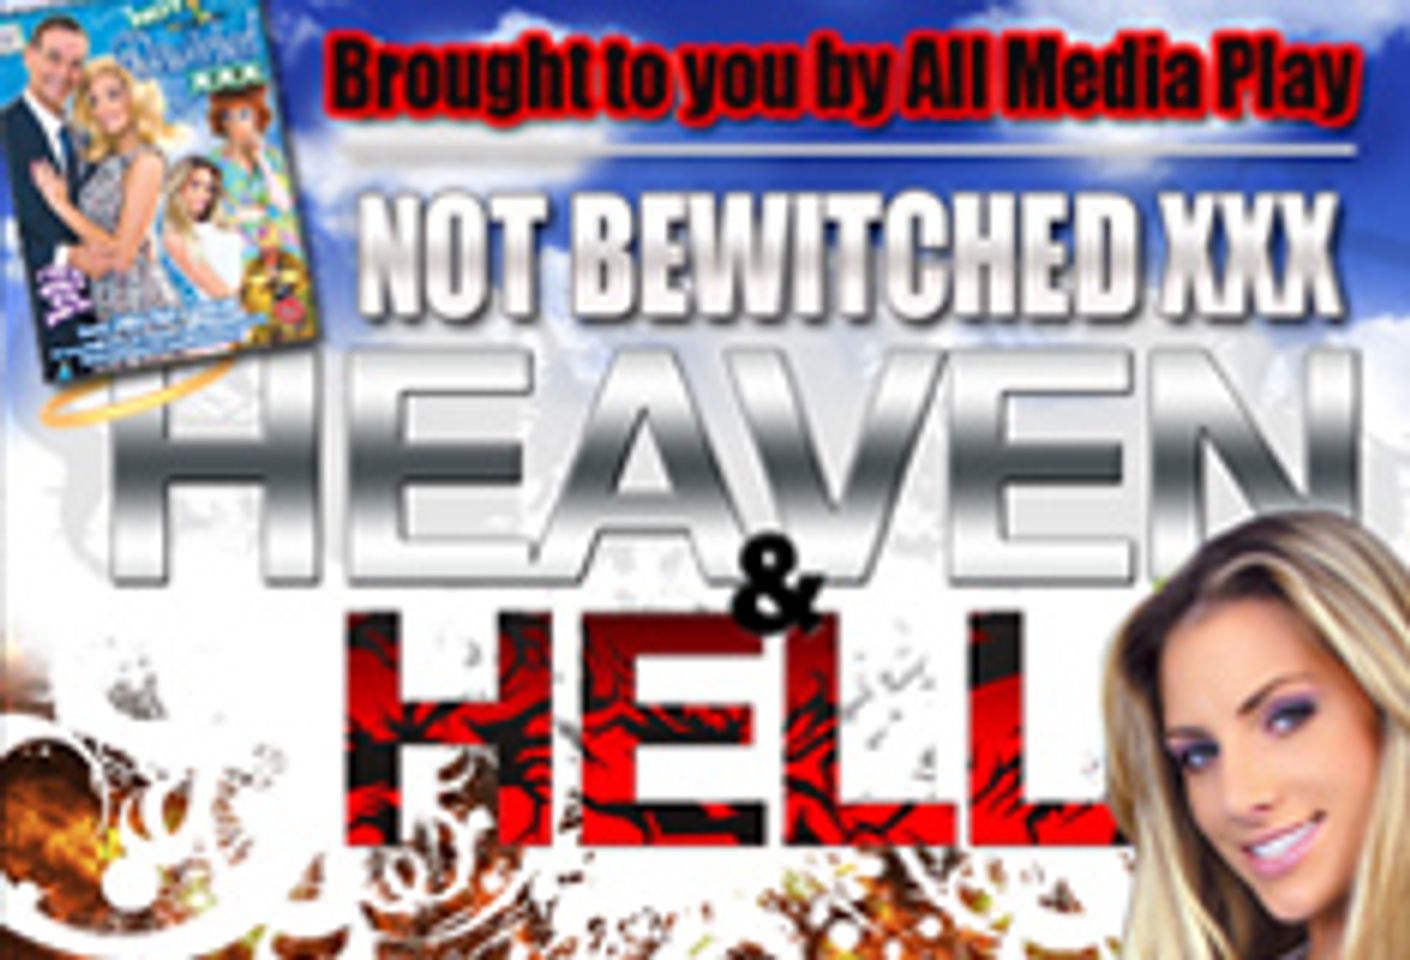 All Media Play to Throw Industry Halloween Bash